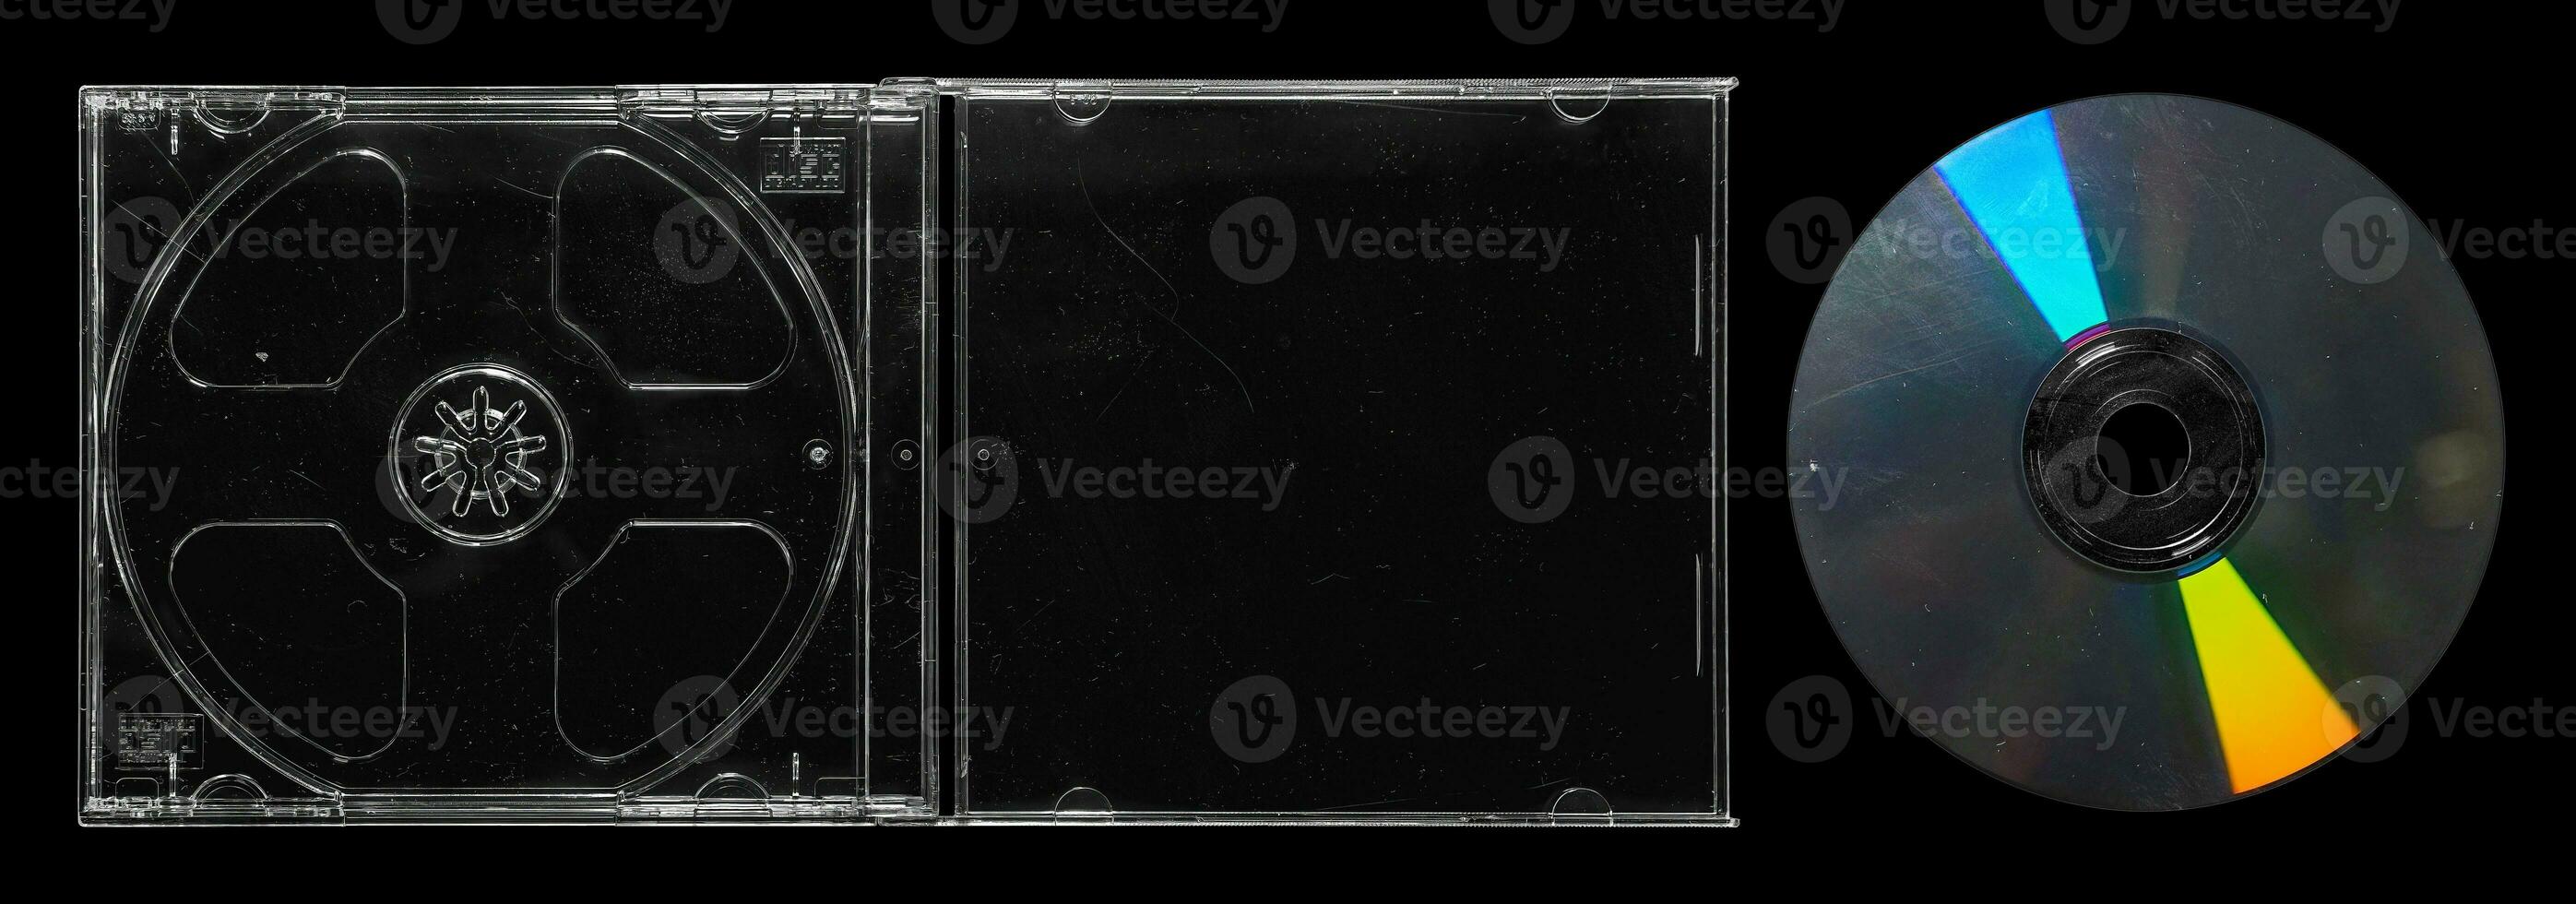 fully transparent jewel case and cd on isolated black background photo